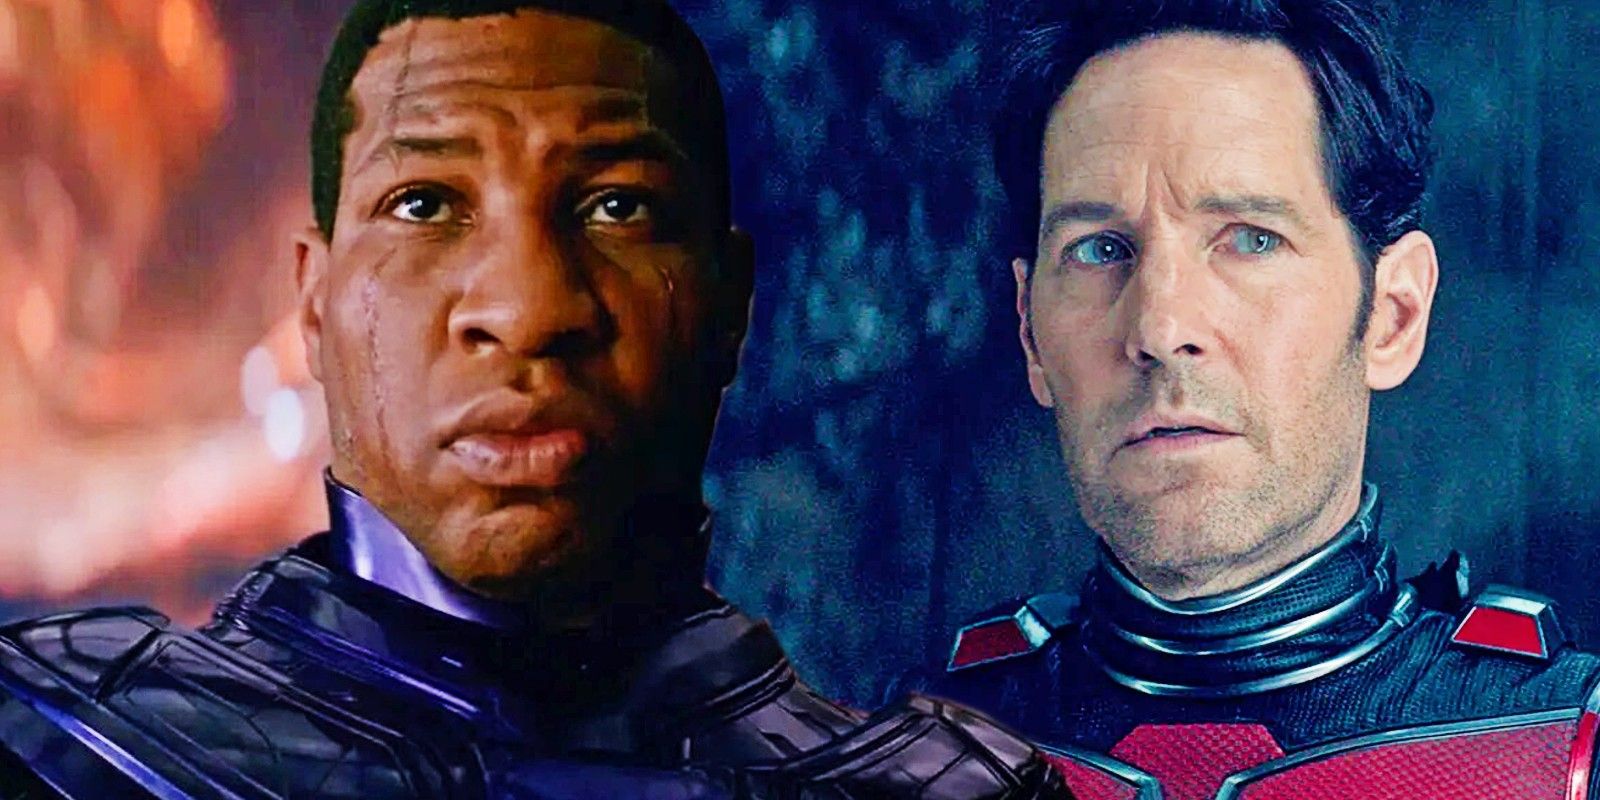 Jonathan Majors' Kang and Paul Rudd's Ant-Man from Ant-Man and the Wasp: Quantumania